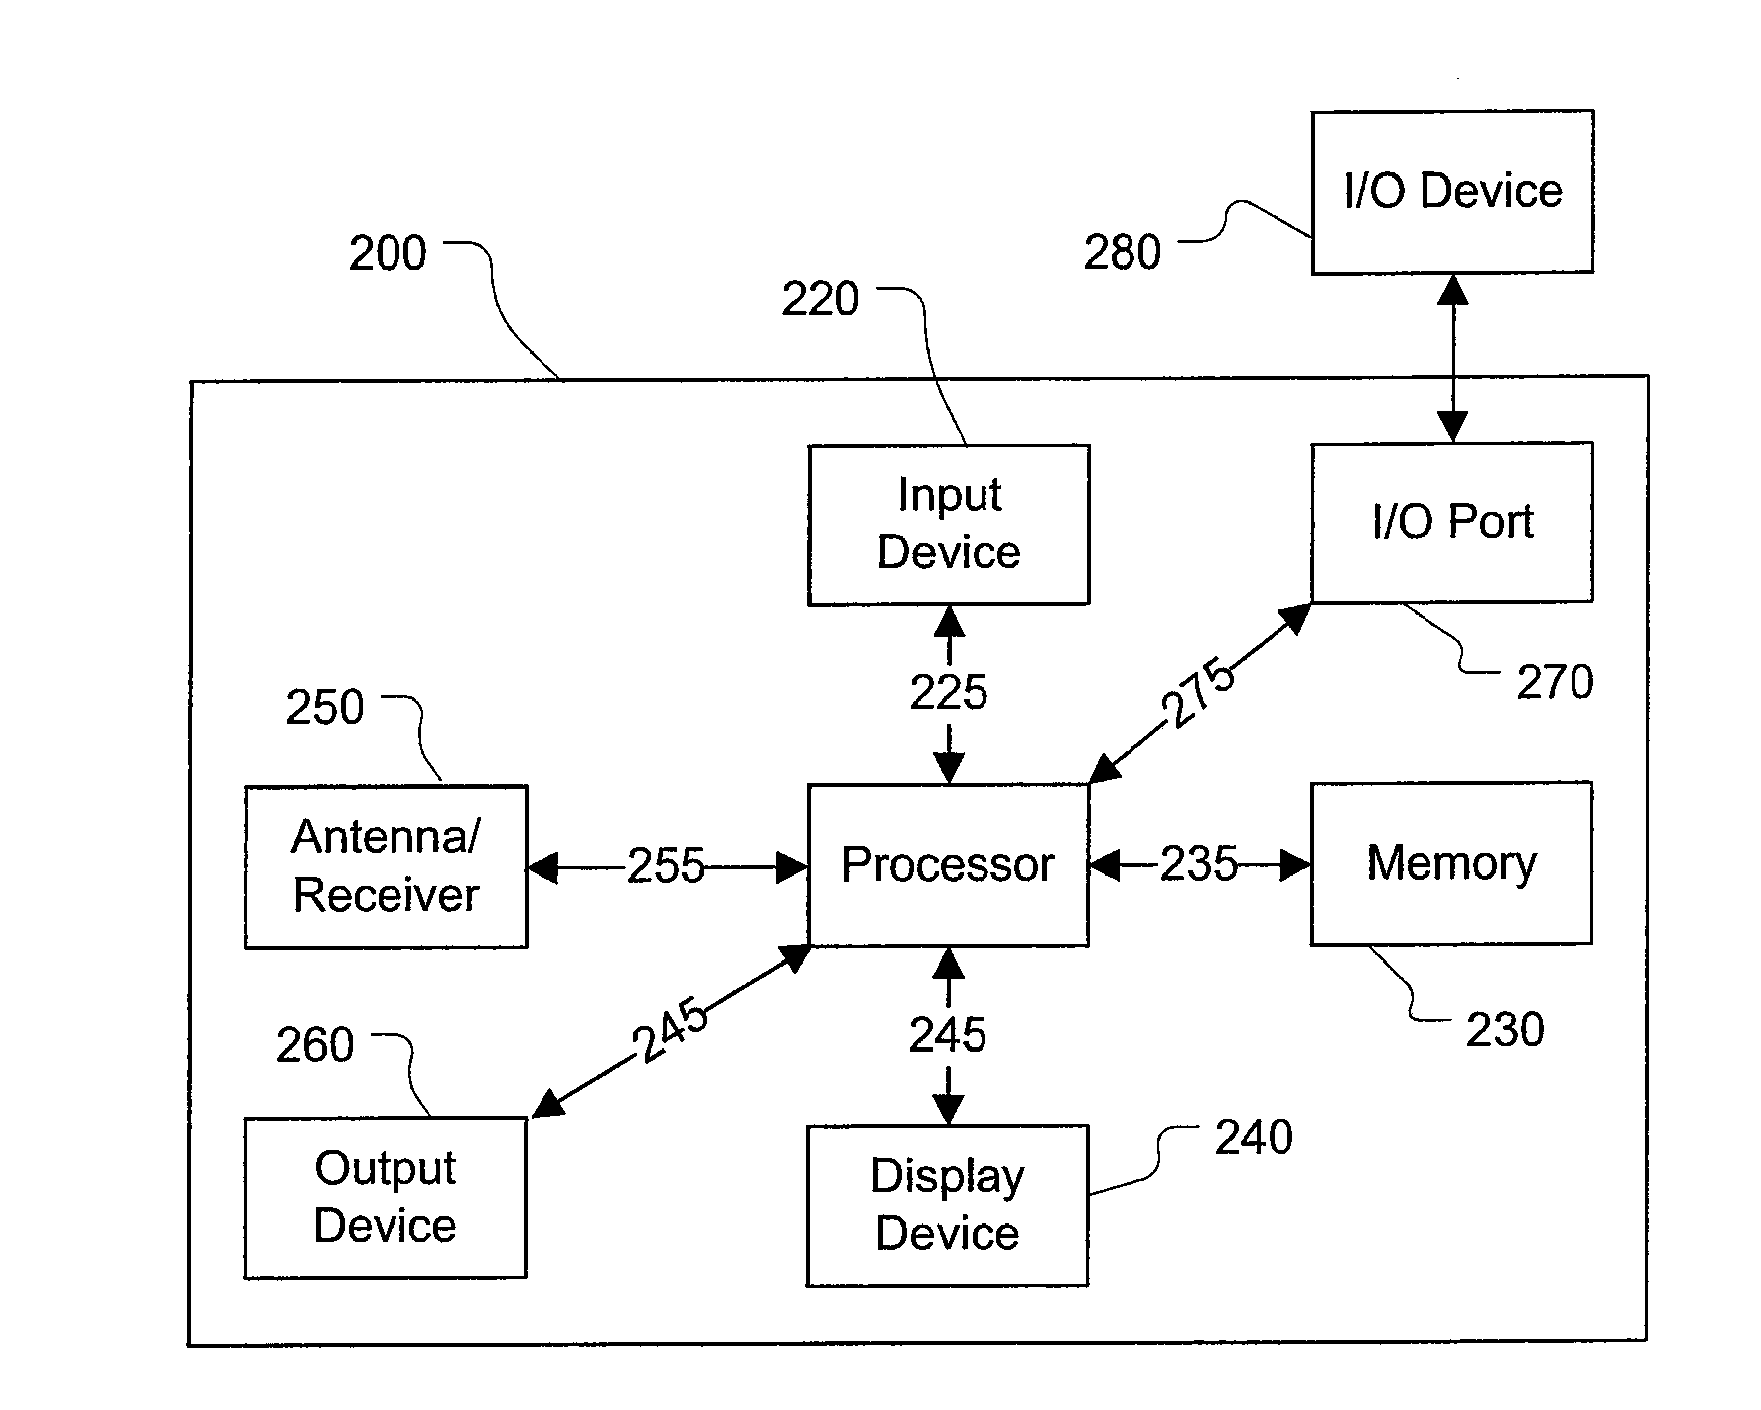 Mobile device that operates differently in different regions